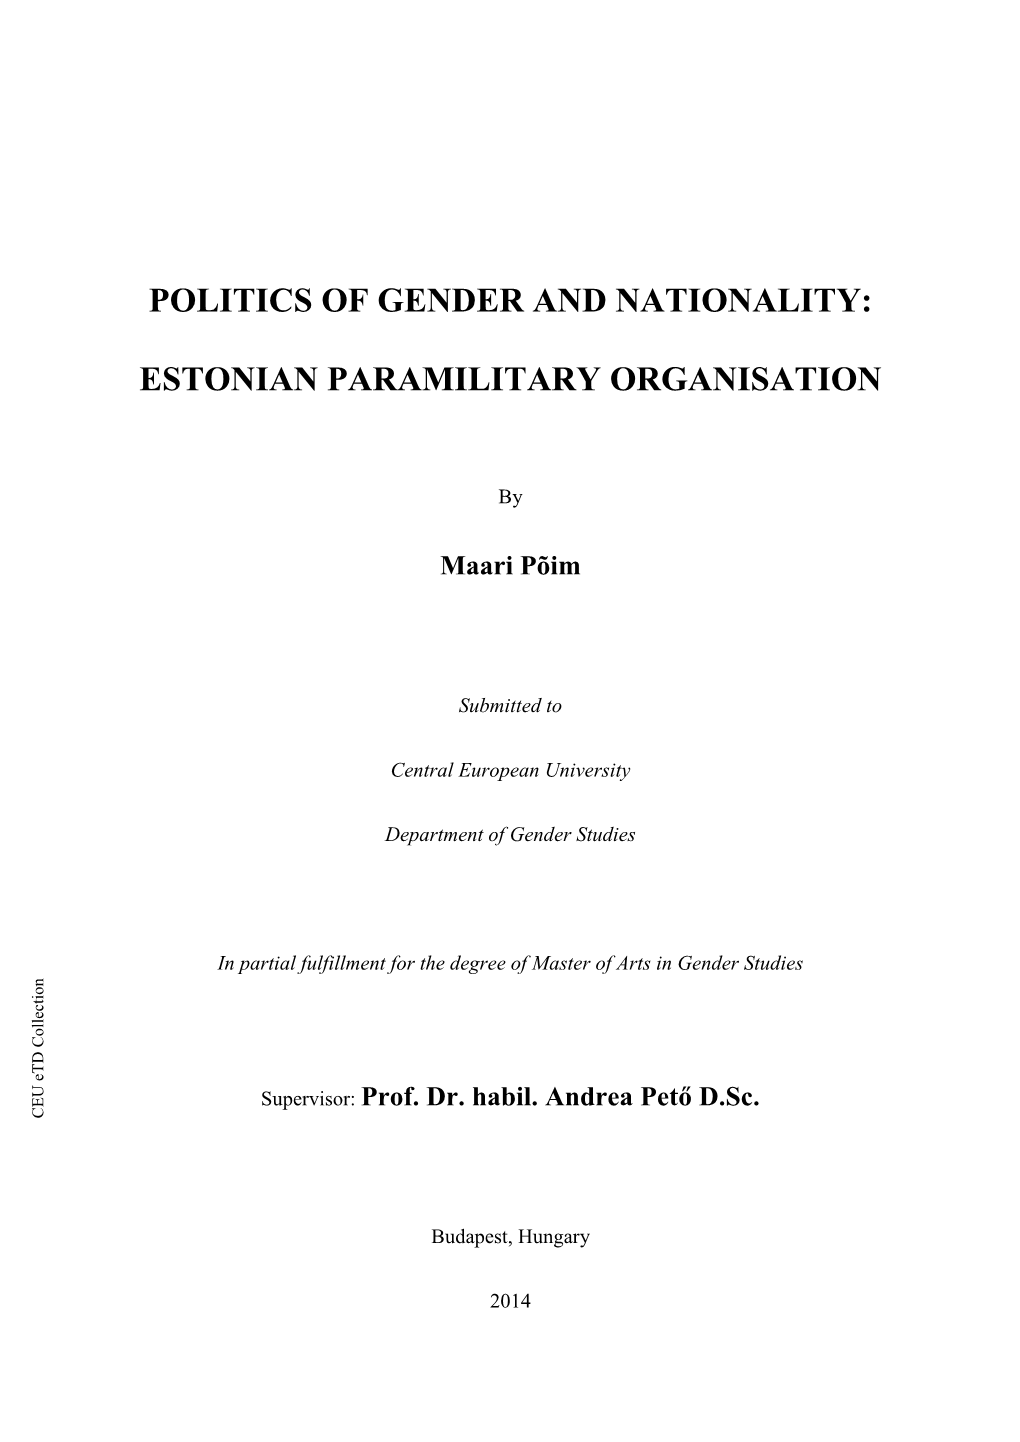 Politics of Gender and Nationality